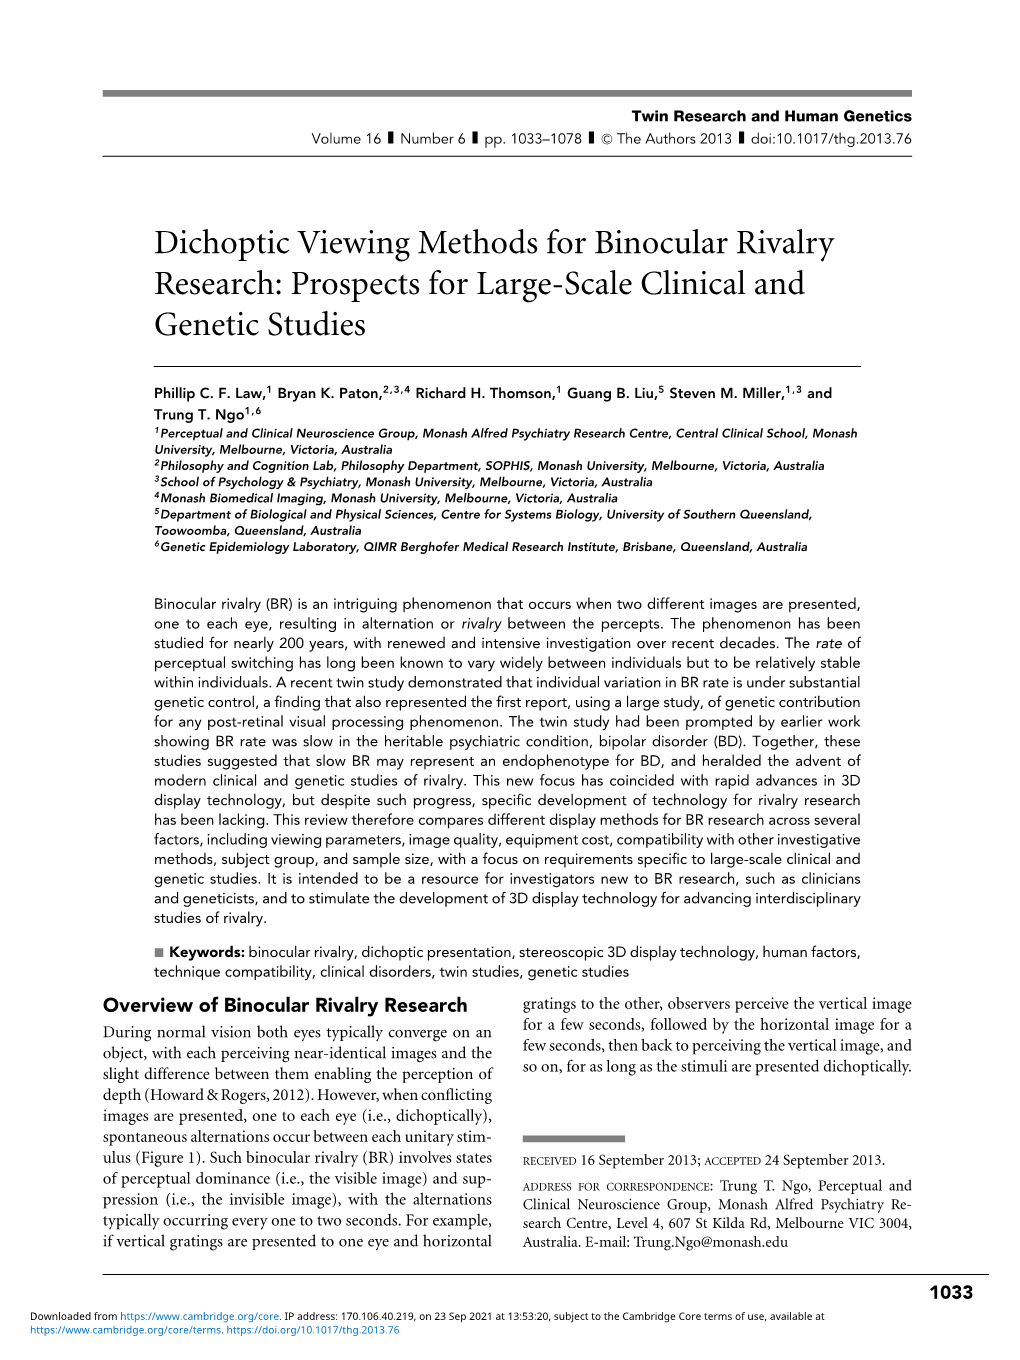 Dichoptic Viewing Methods for Binocular Rivalry Research: Prospects for Large-Scale Clinical and Genetic Studies